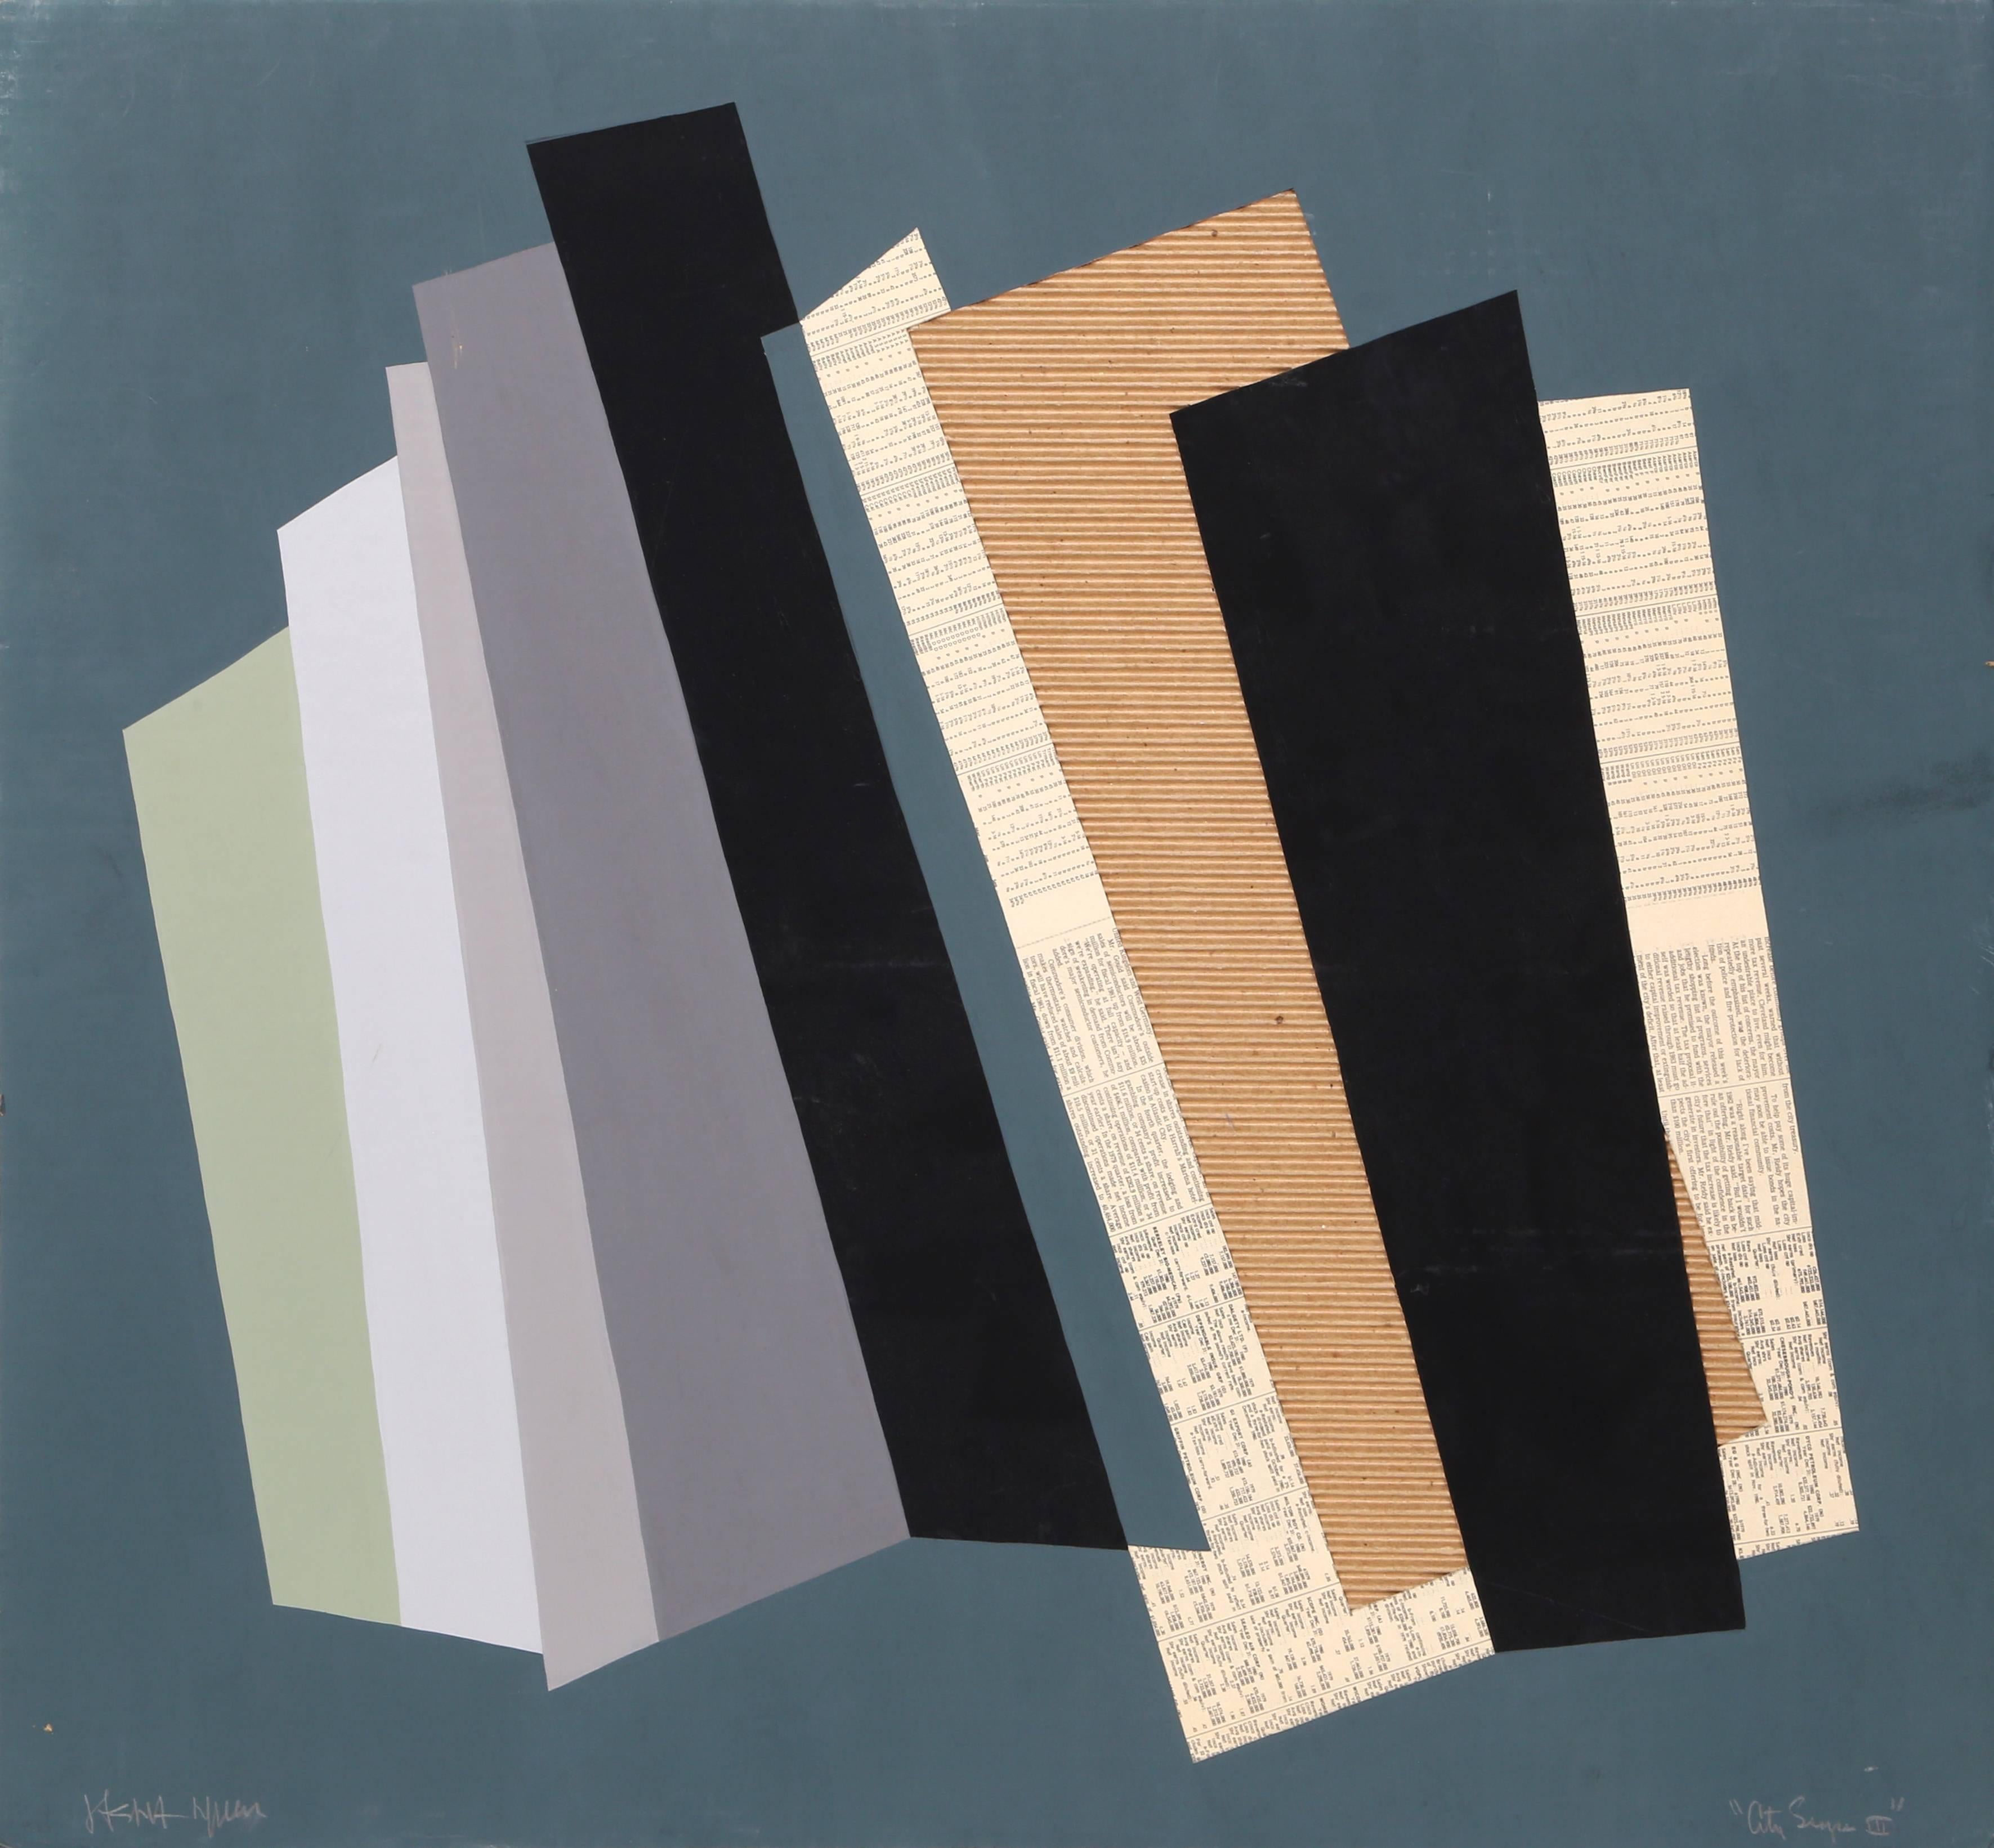 Artist: Jasha Green, American (1923 - 2006)
Title: City Scapes III
Year: circa 1981
Medium: Acrylic and collage on cardboard, signed in pencil
Size: 30 x 32 inches